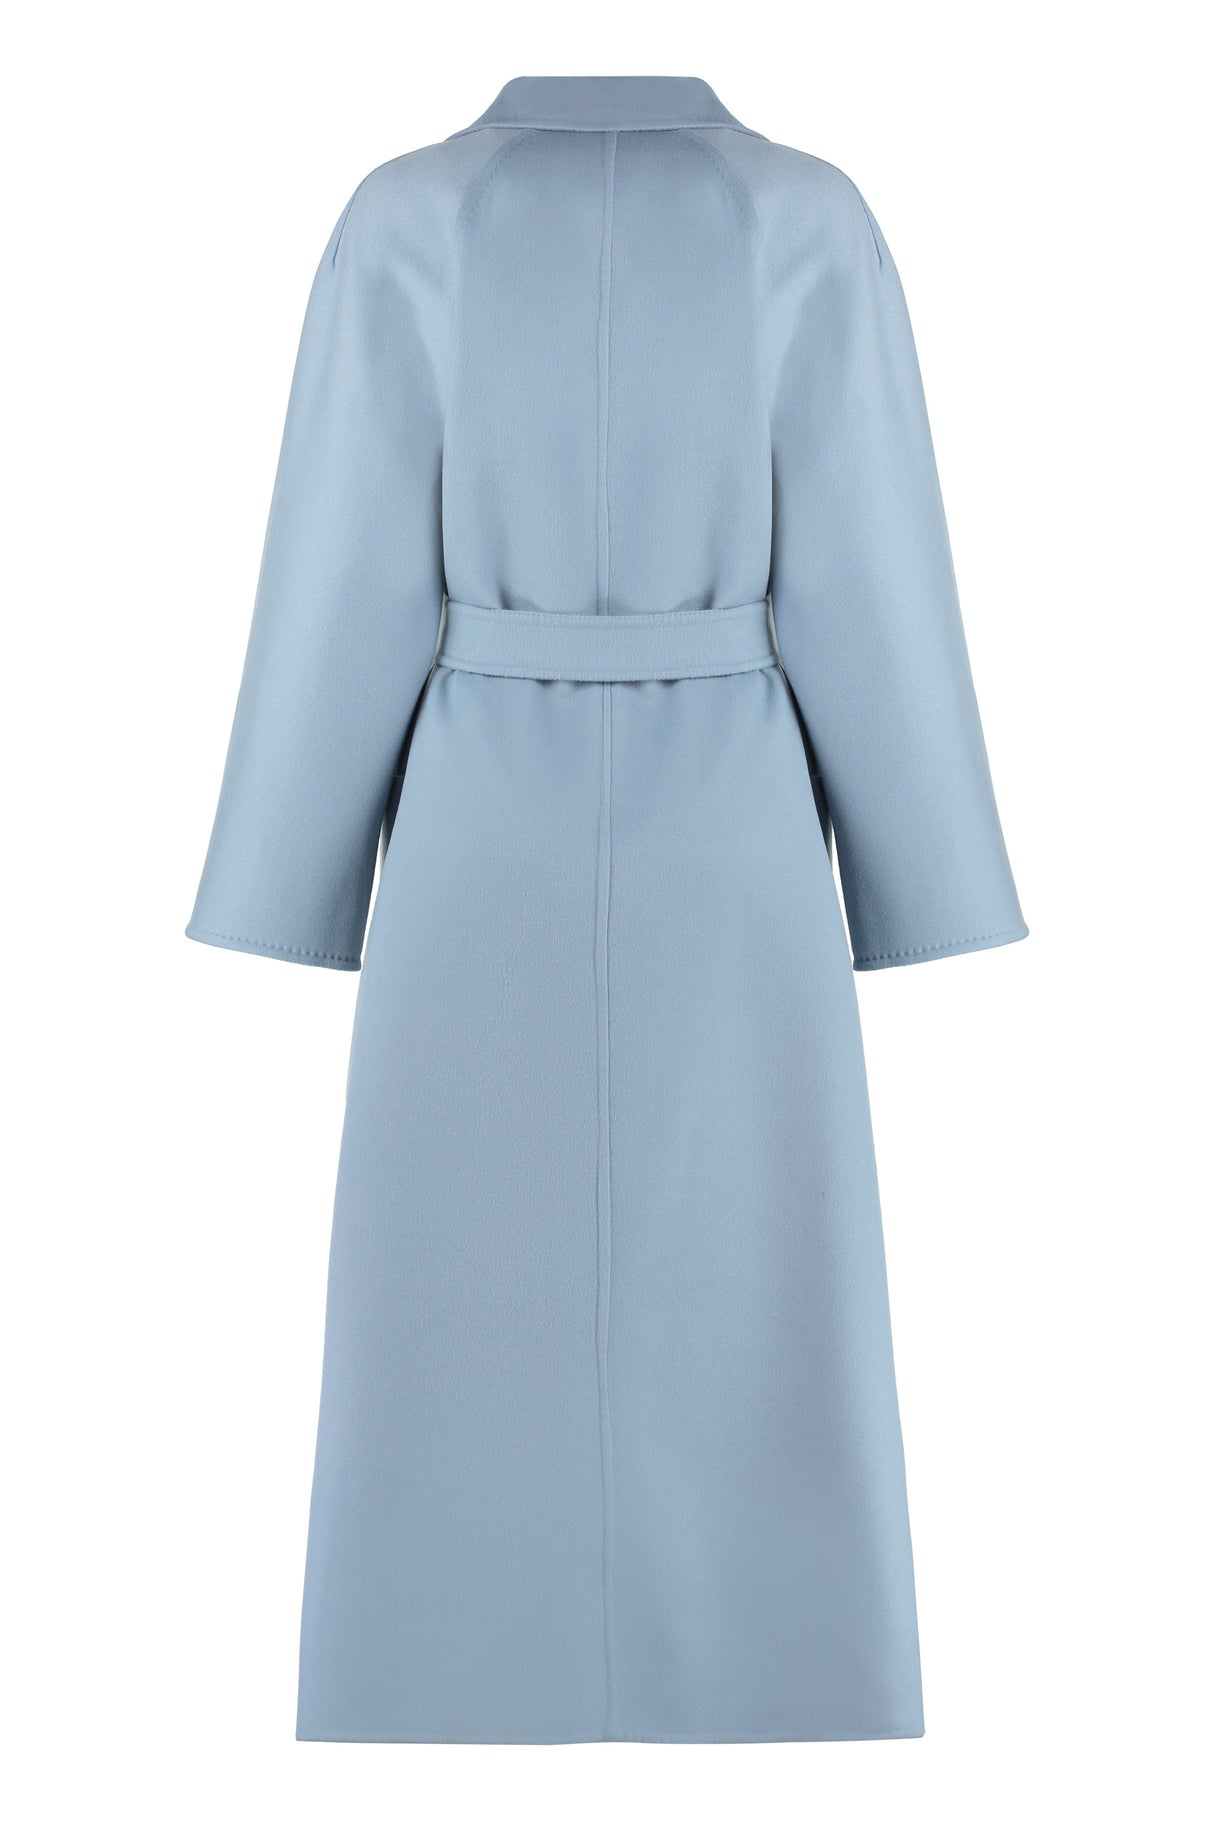 MAX MARA Light Blue Wool and Cashmere Jacket with Coordinated Waist Belt for Women - SS23